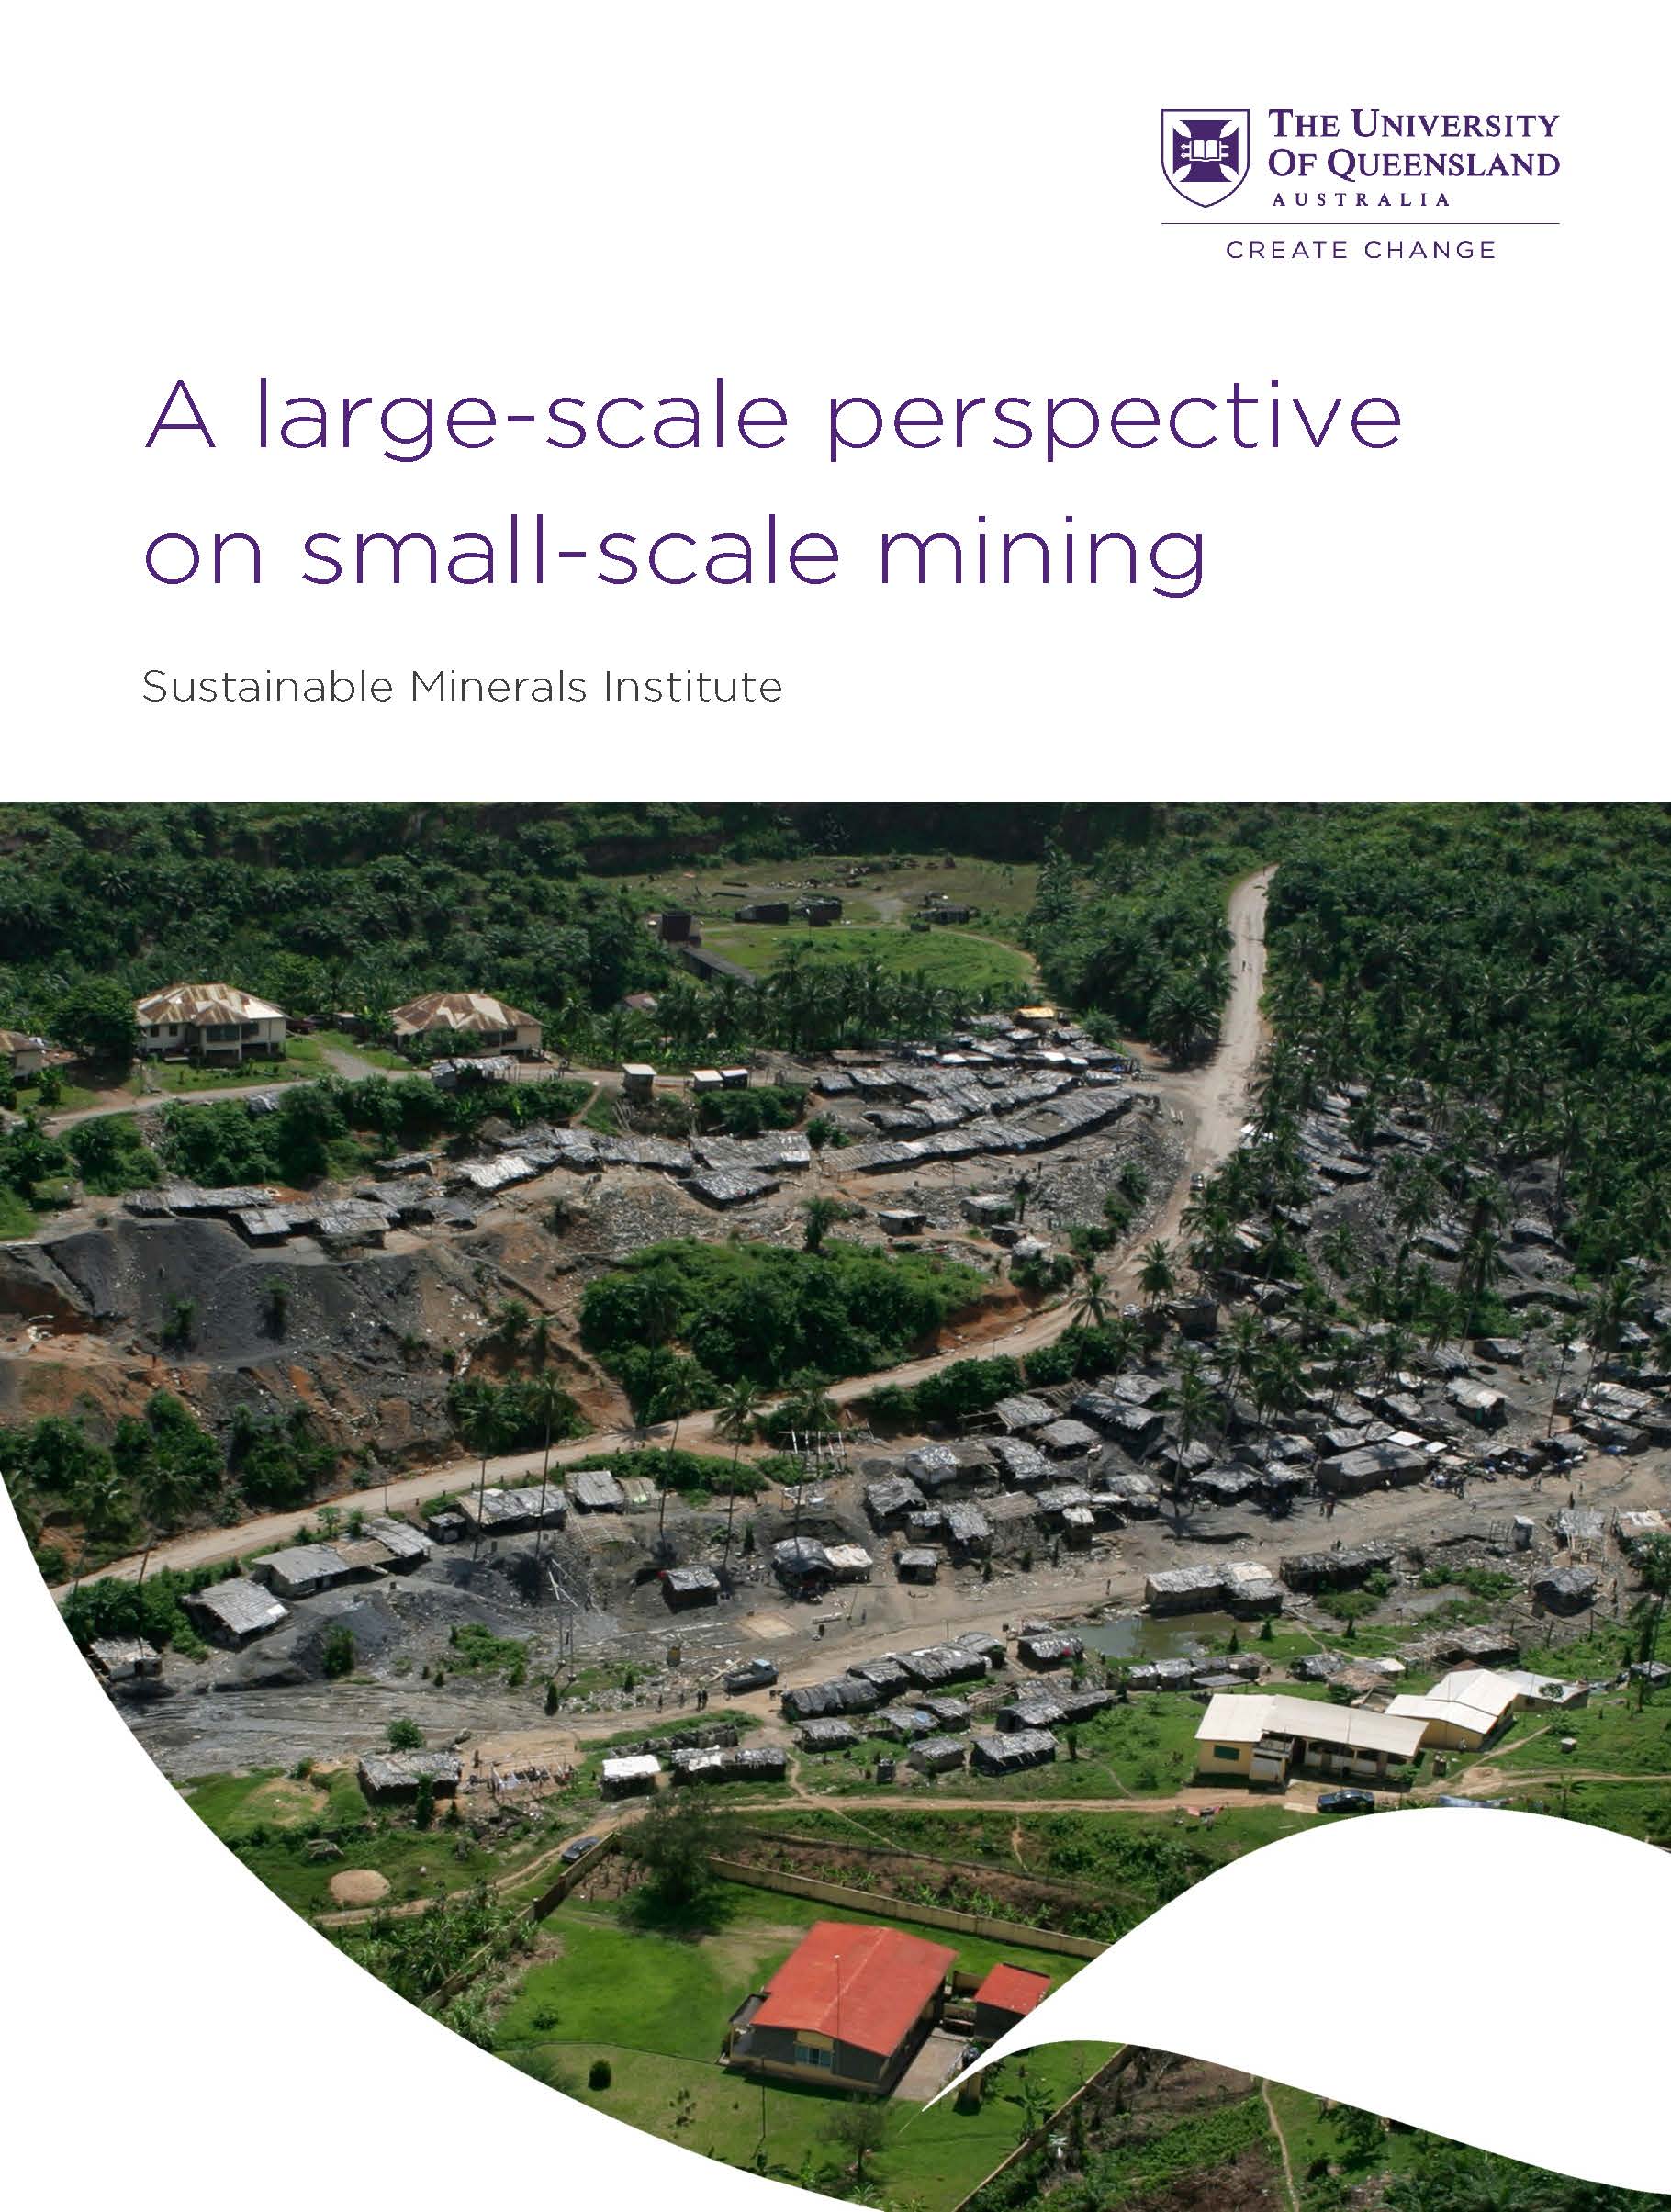 A large-scale perspective on small-scale mining